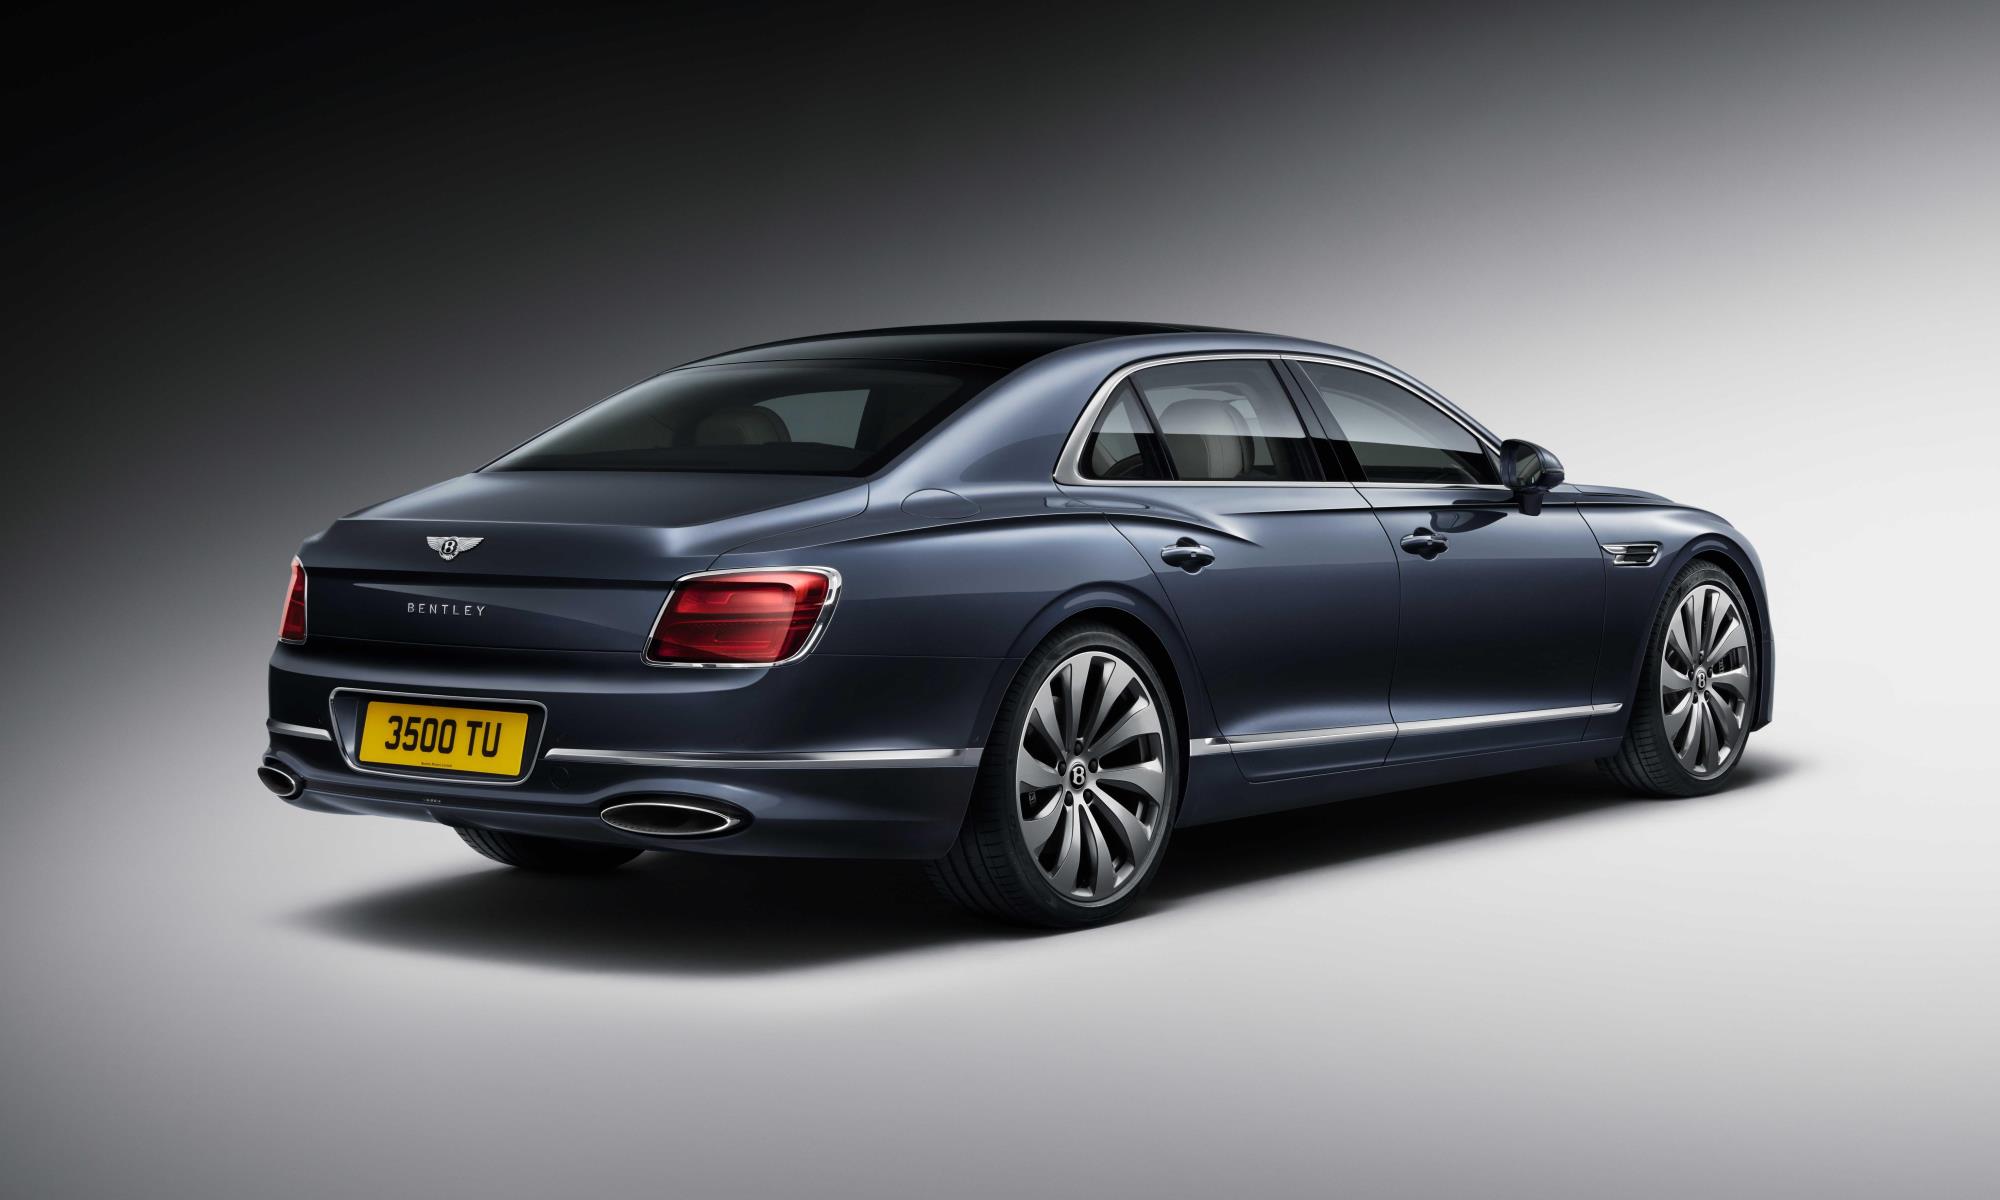 New Bentley Flying Spur rear